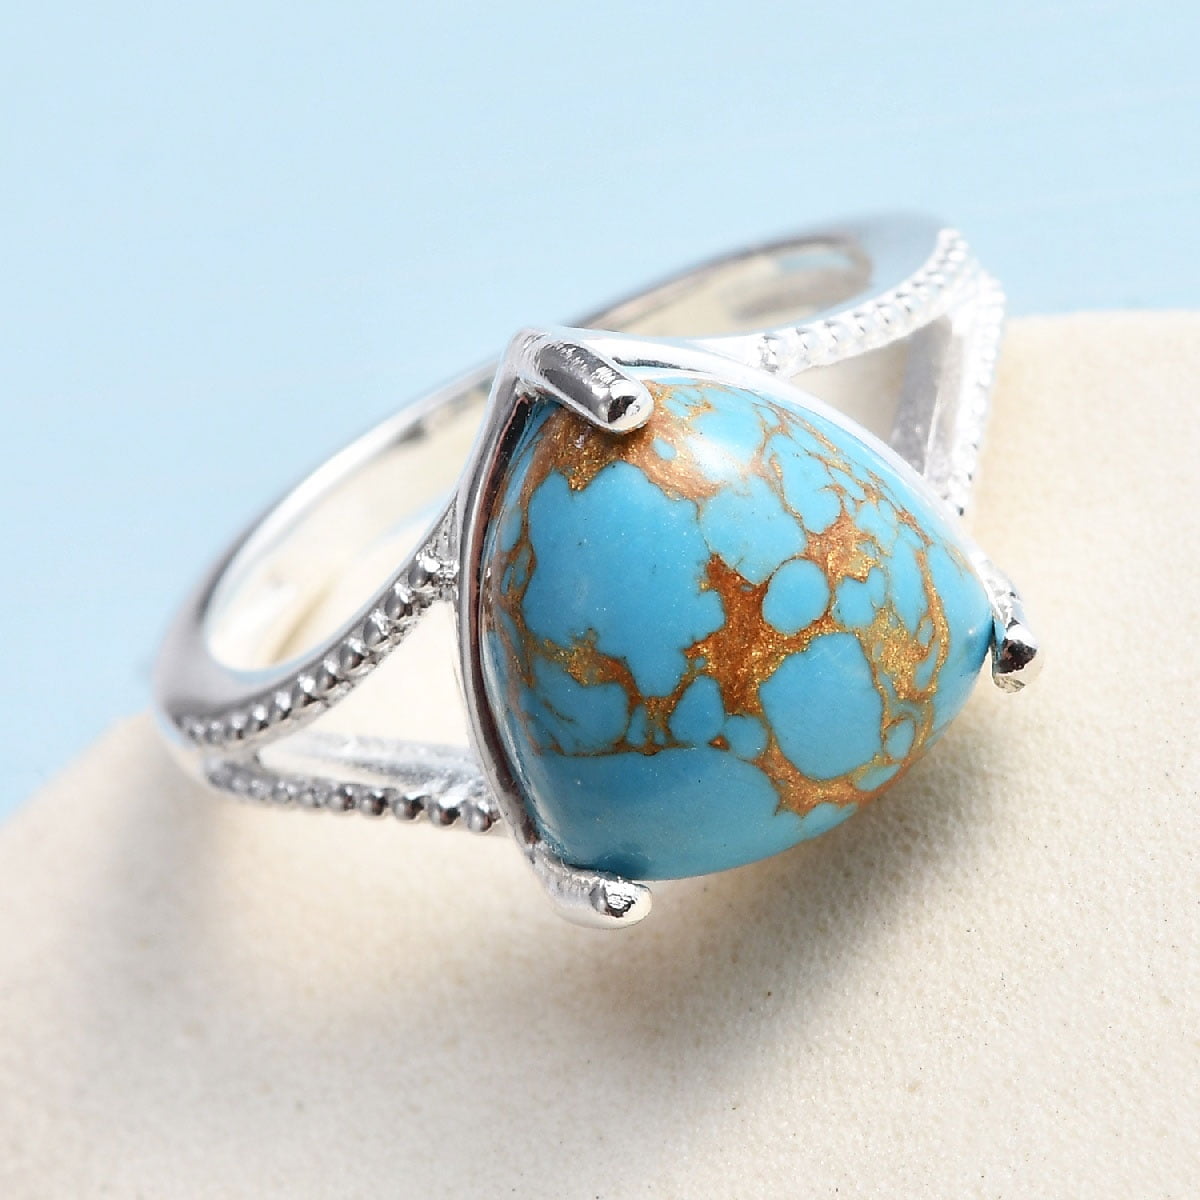 Silver Band Ring 925 Silver Sterling Chinese Turquoise  Ring,Chinese Turquoise Gemstone,Turquoise Ring,Prong Ring Silver Statement Ring,